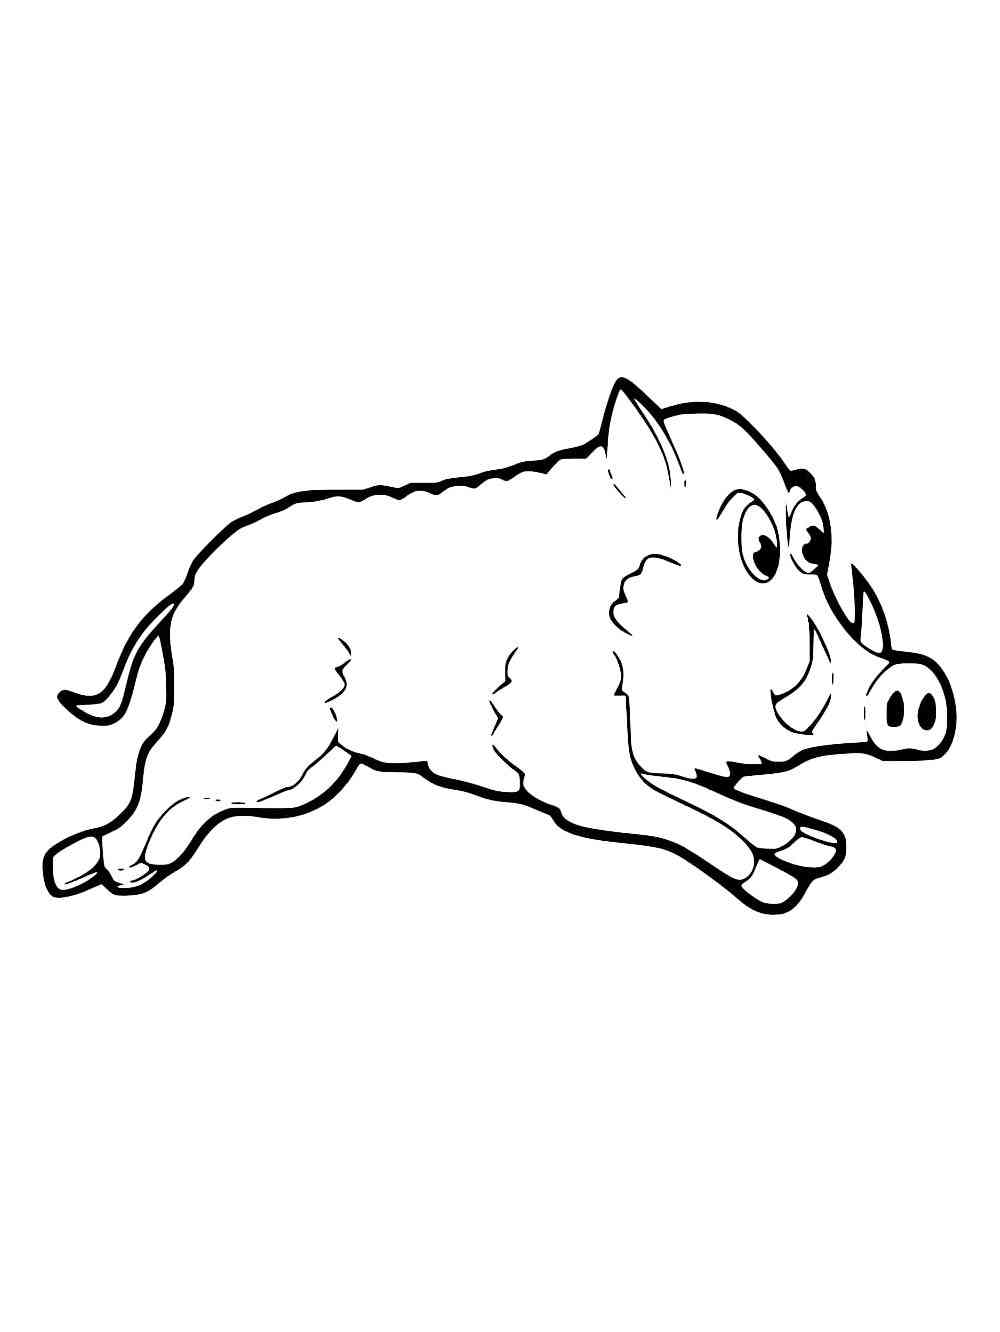 Boar coloring pages